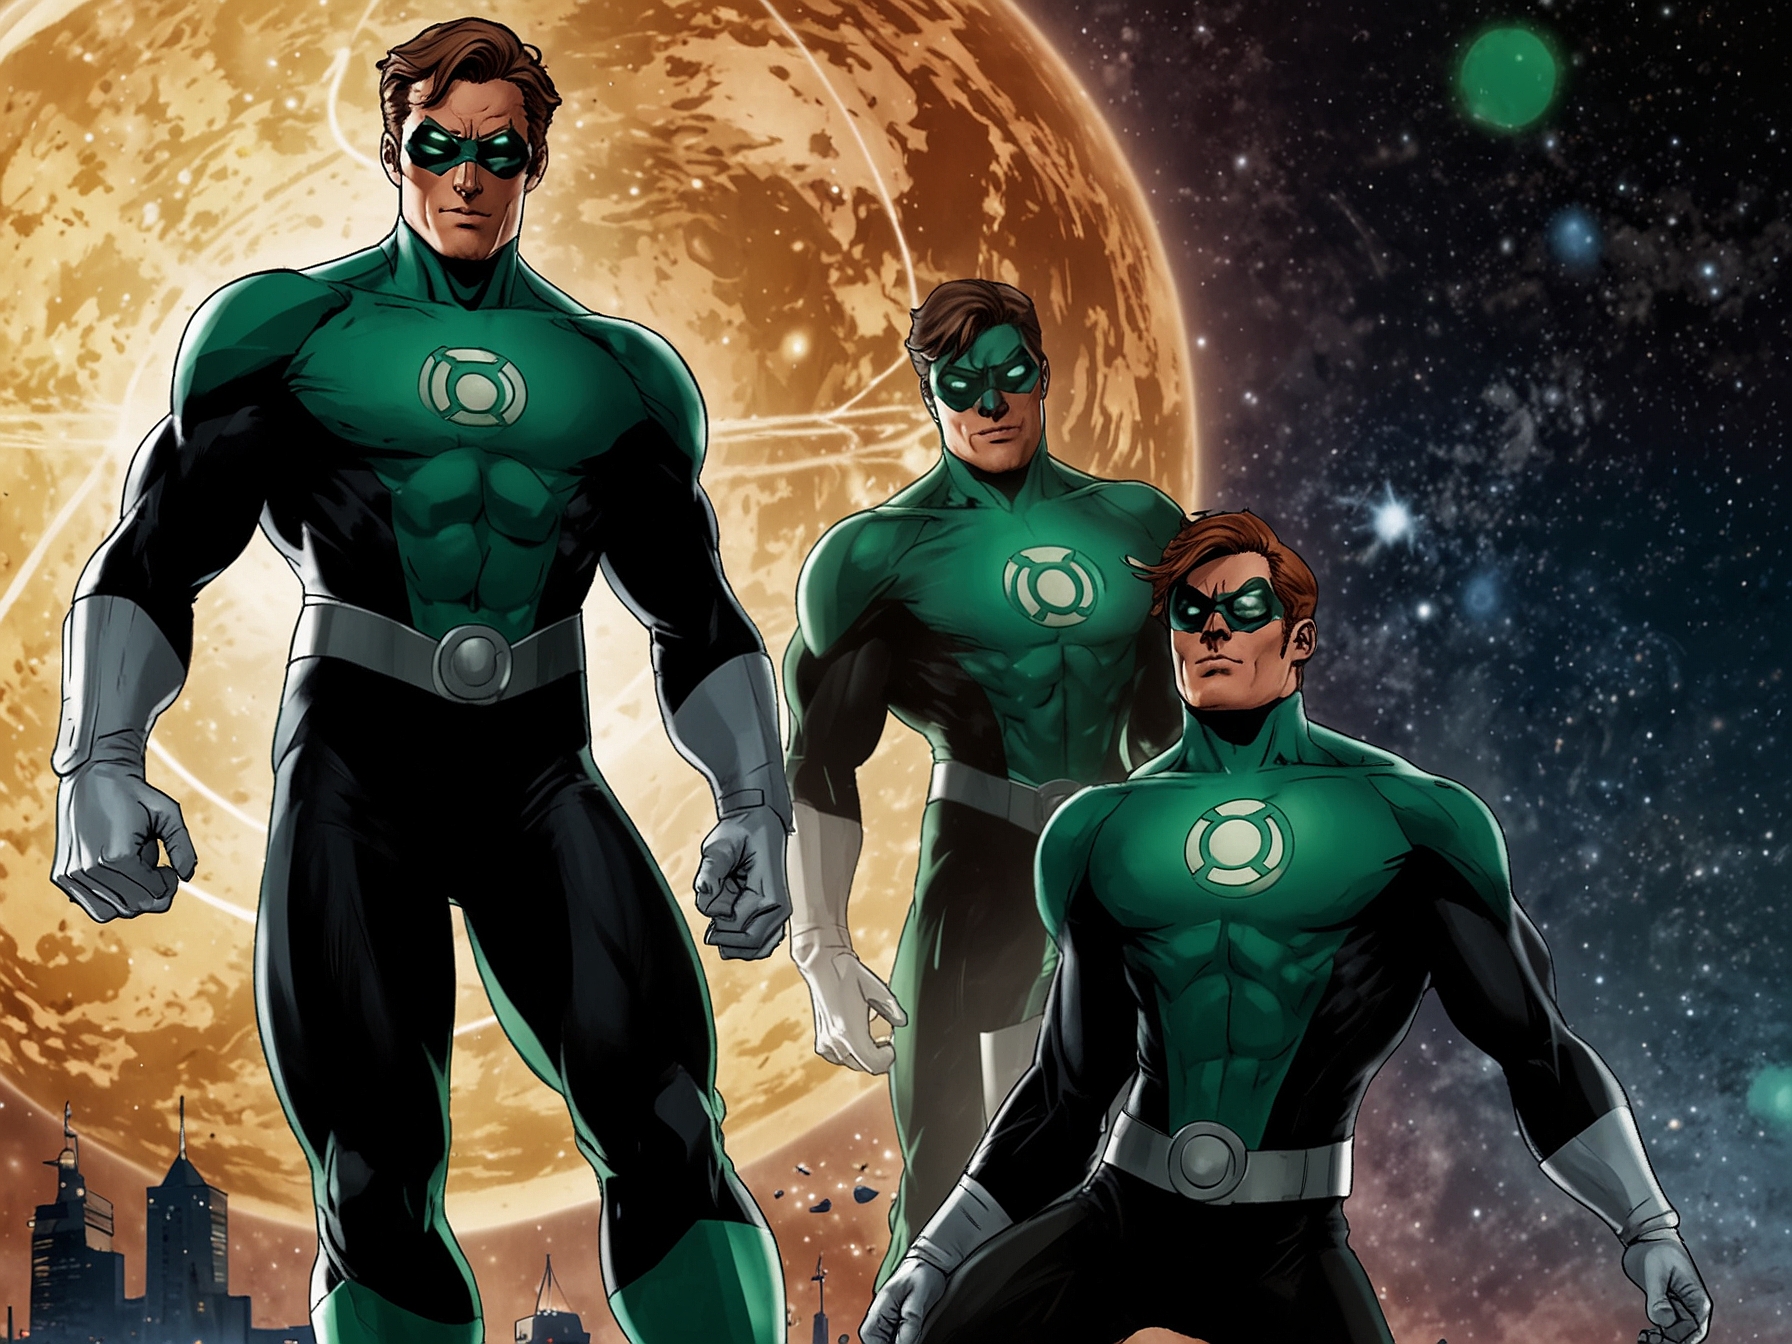 An illustration of the Green Lantern Corps members, showcasing their iconic power rings against a backdrop of outer space, capturing the essence of the intergalactic police force.